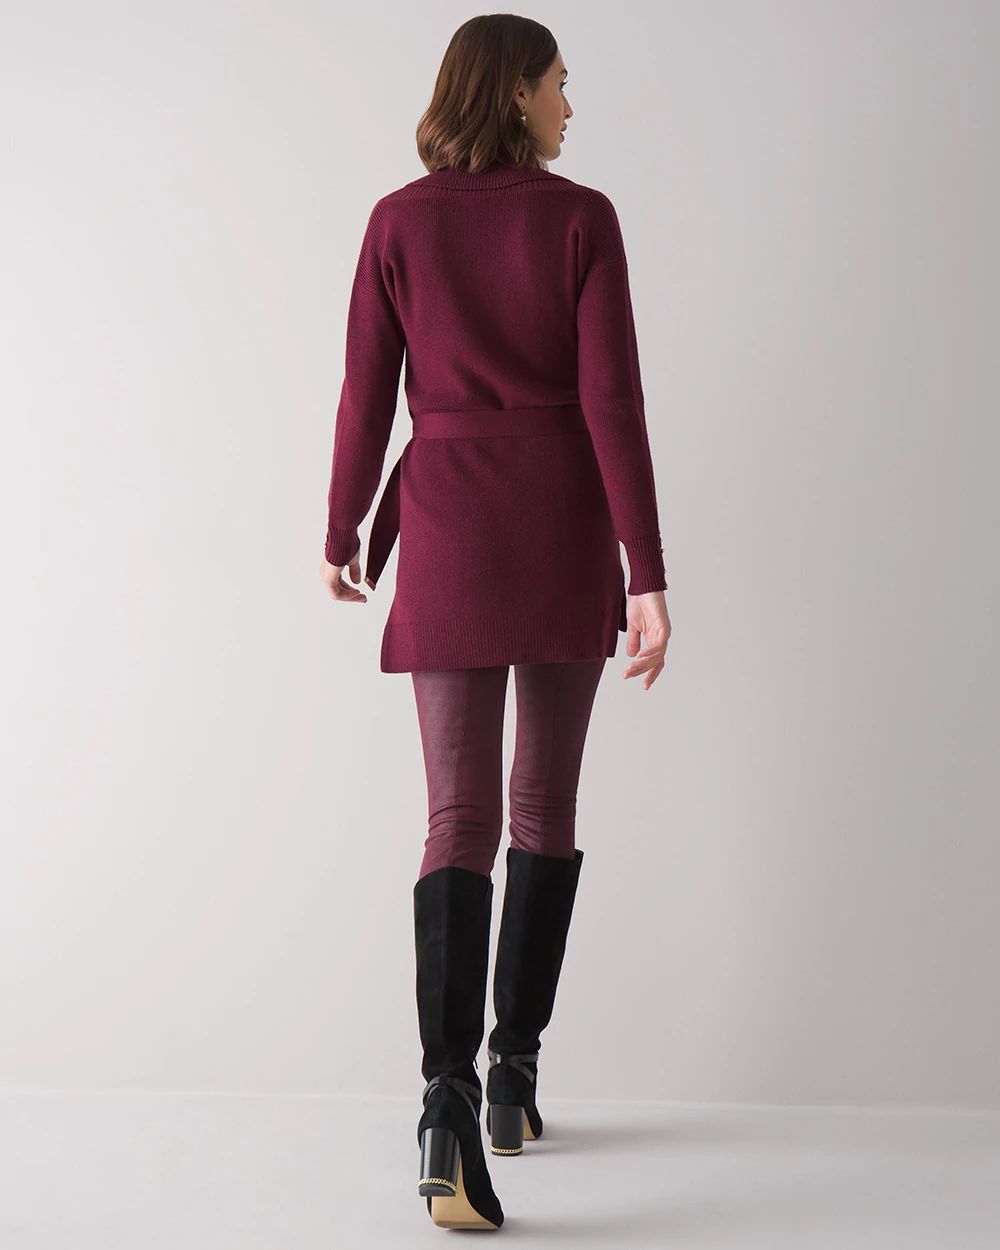 Faux Suede WHBM Runway Leggings click to view larger image.